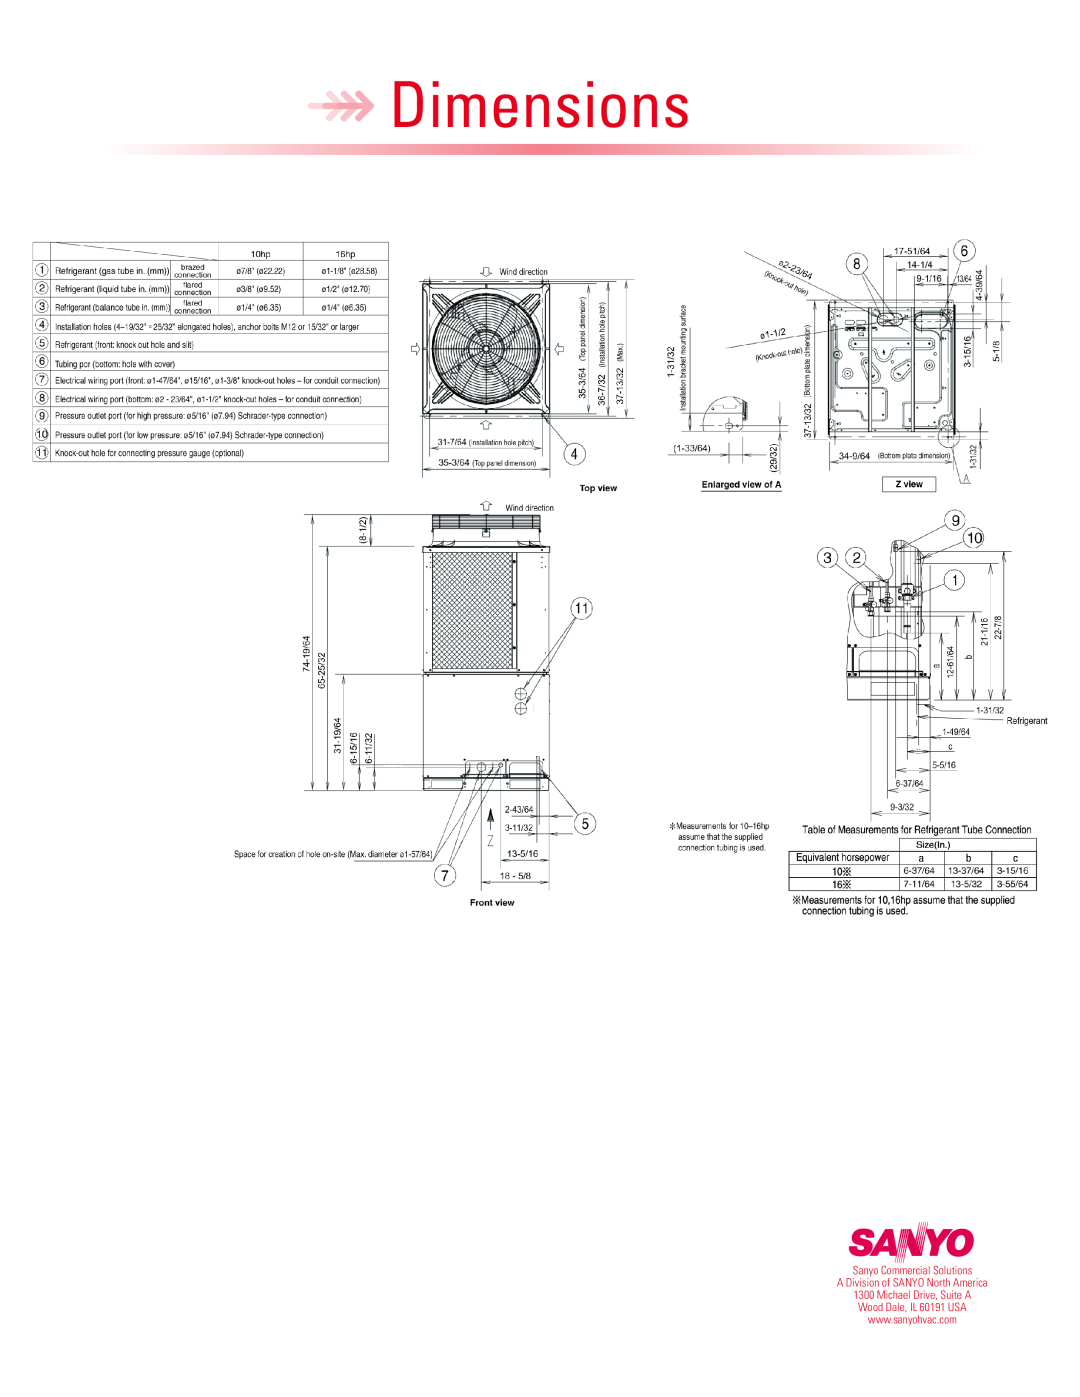 Sanyo CHDX14053 warranty Dimensions, Sanyo Commercial Solutions, A Division of SANYO North America, Michael Drive, Suite A 